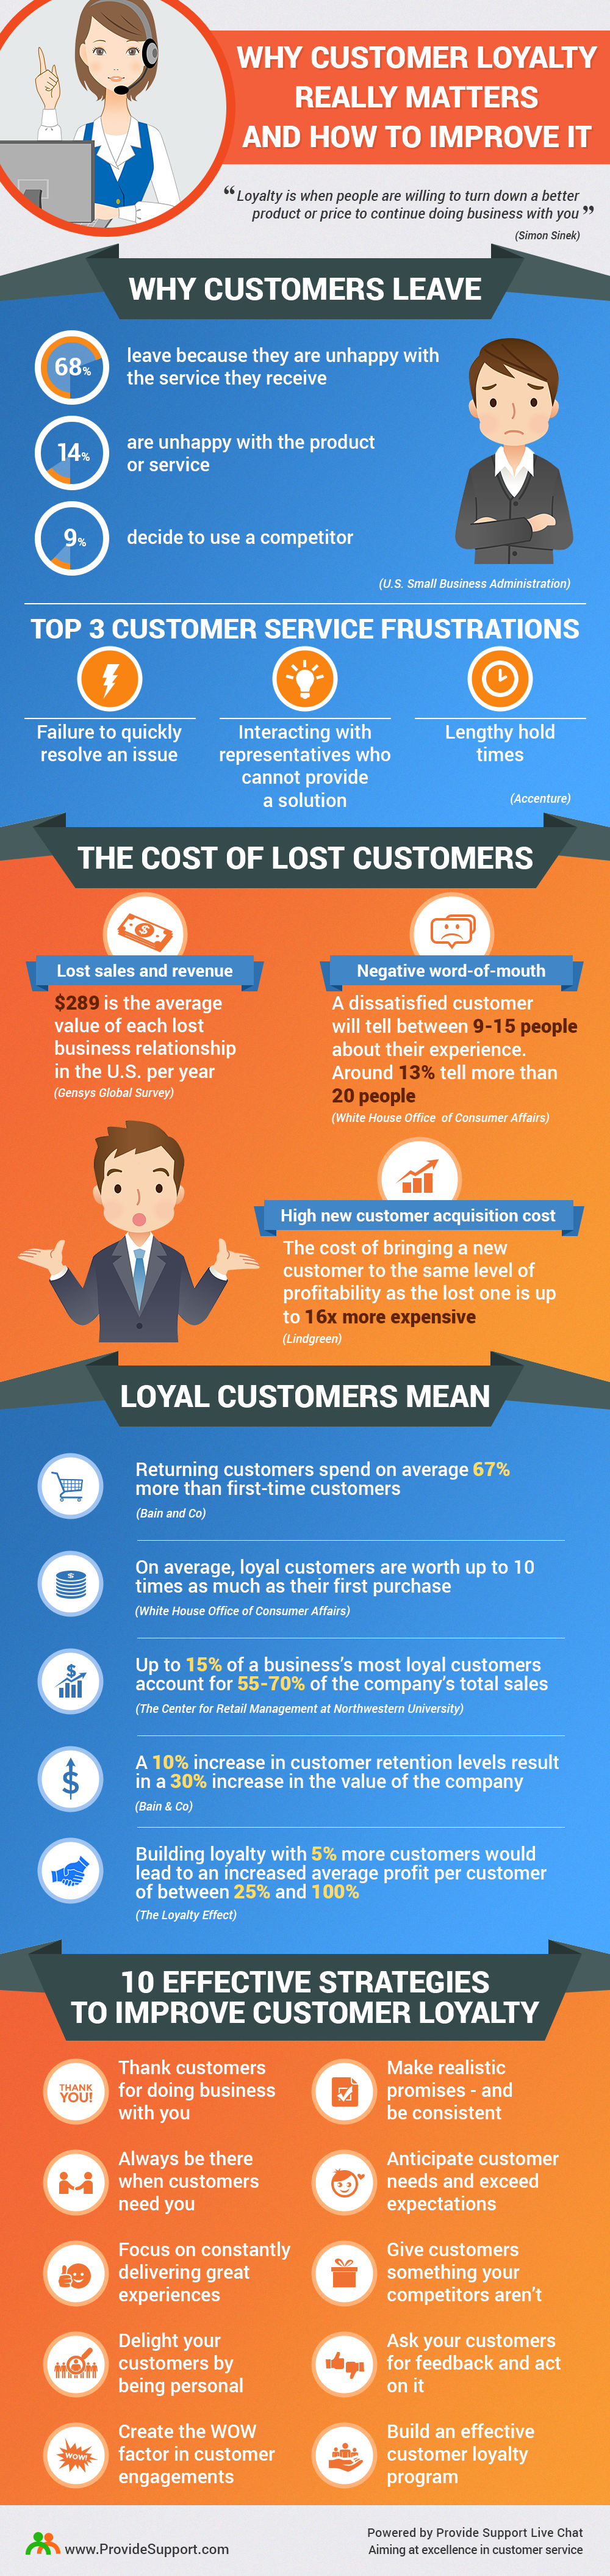 Why Customer Loyalty Matters and How to Improve it